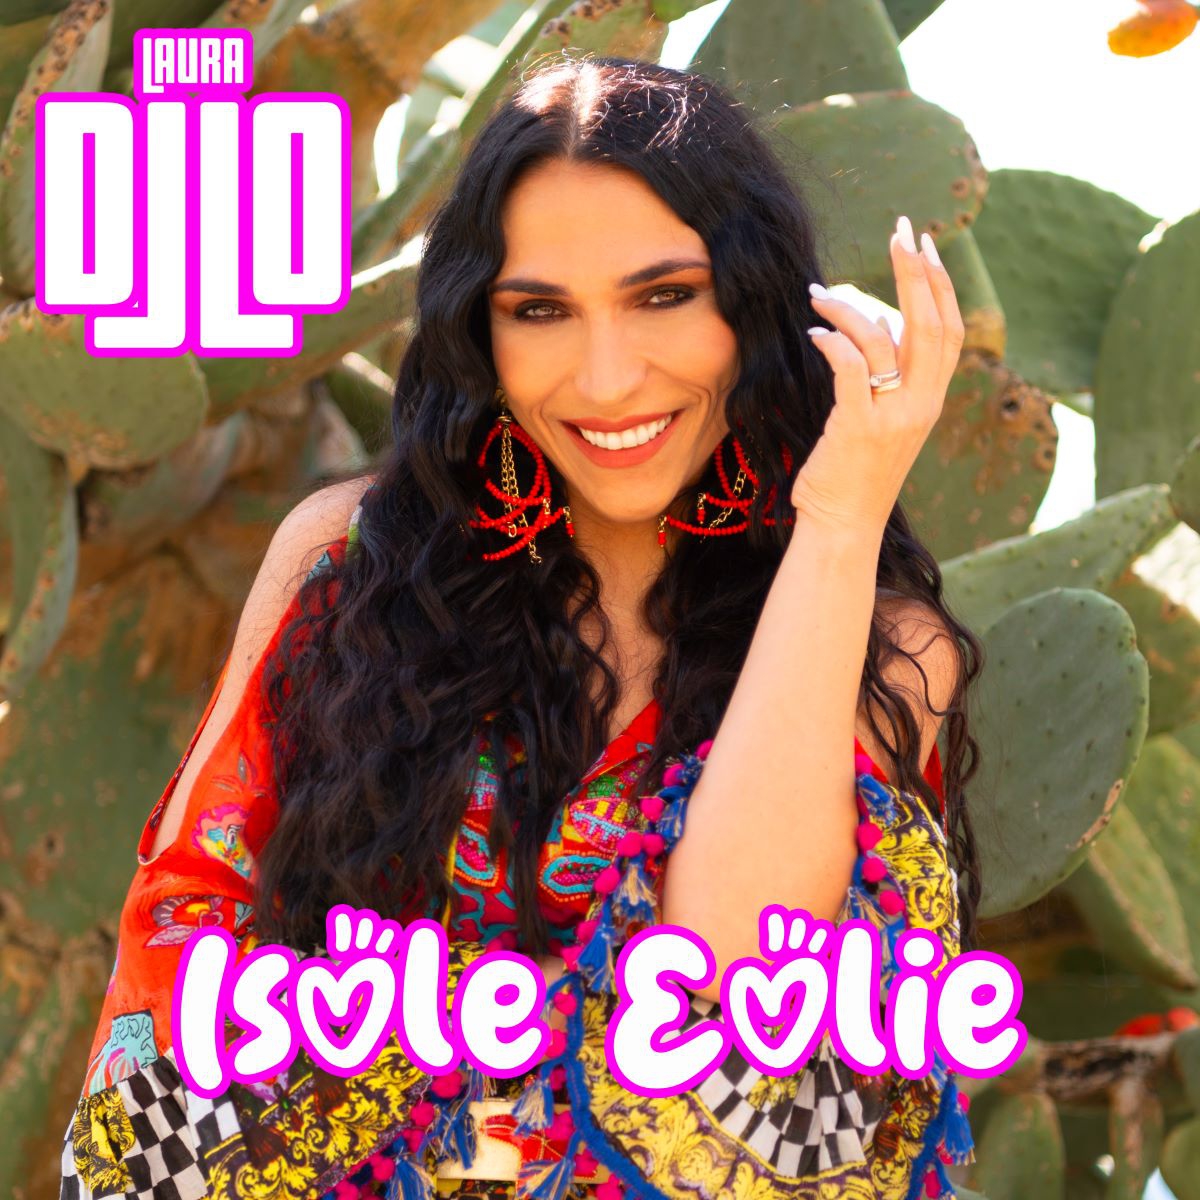 Laura DjLo - “Isole Eolie”